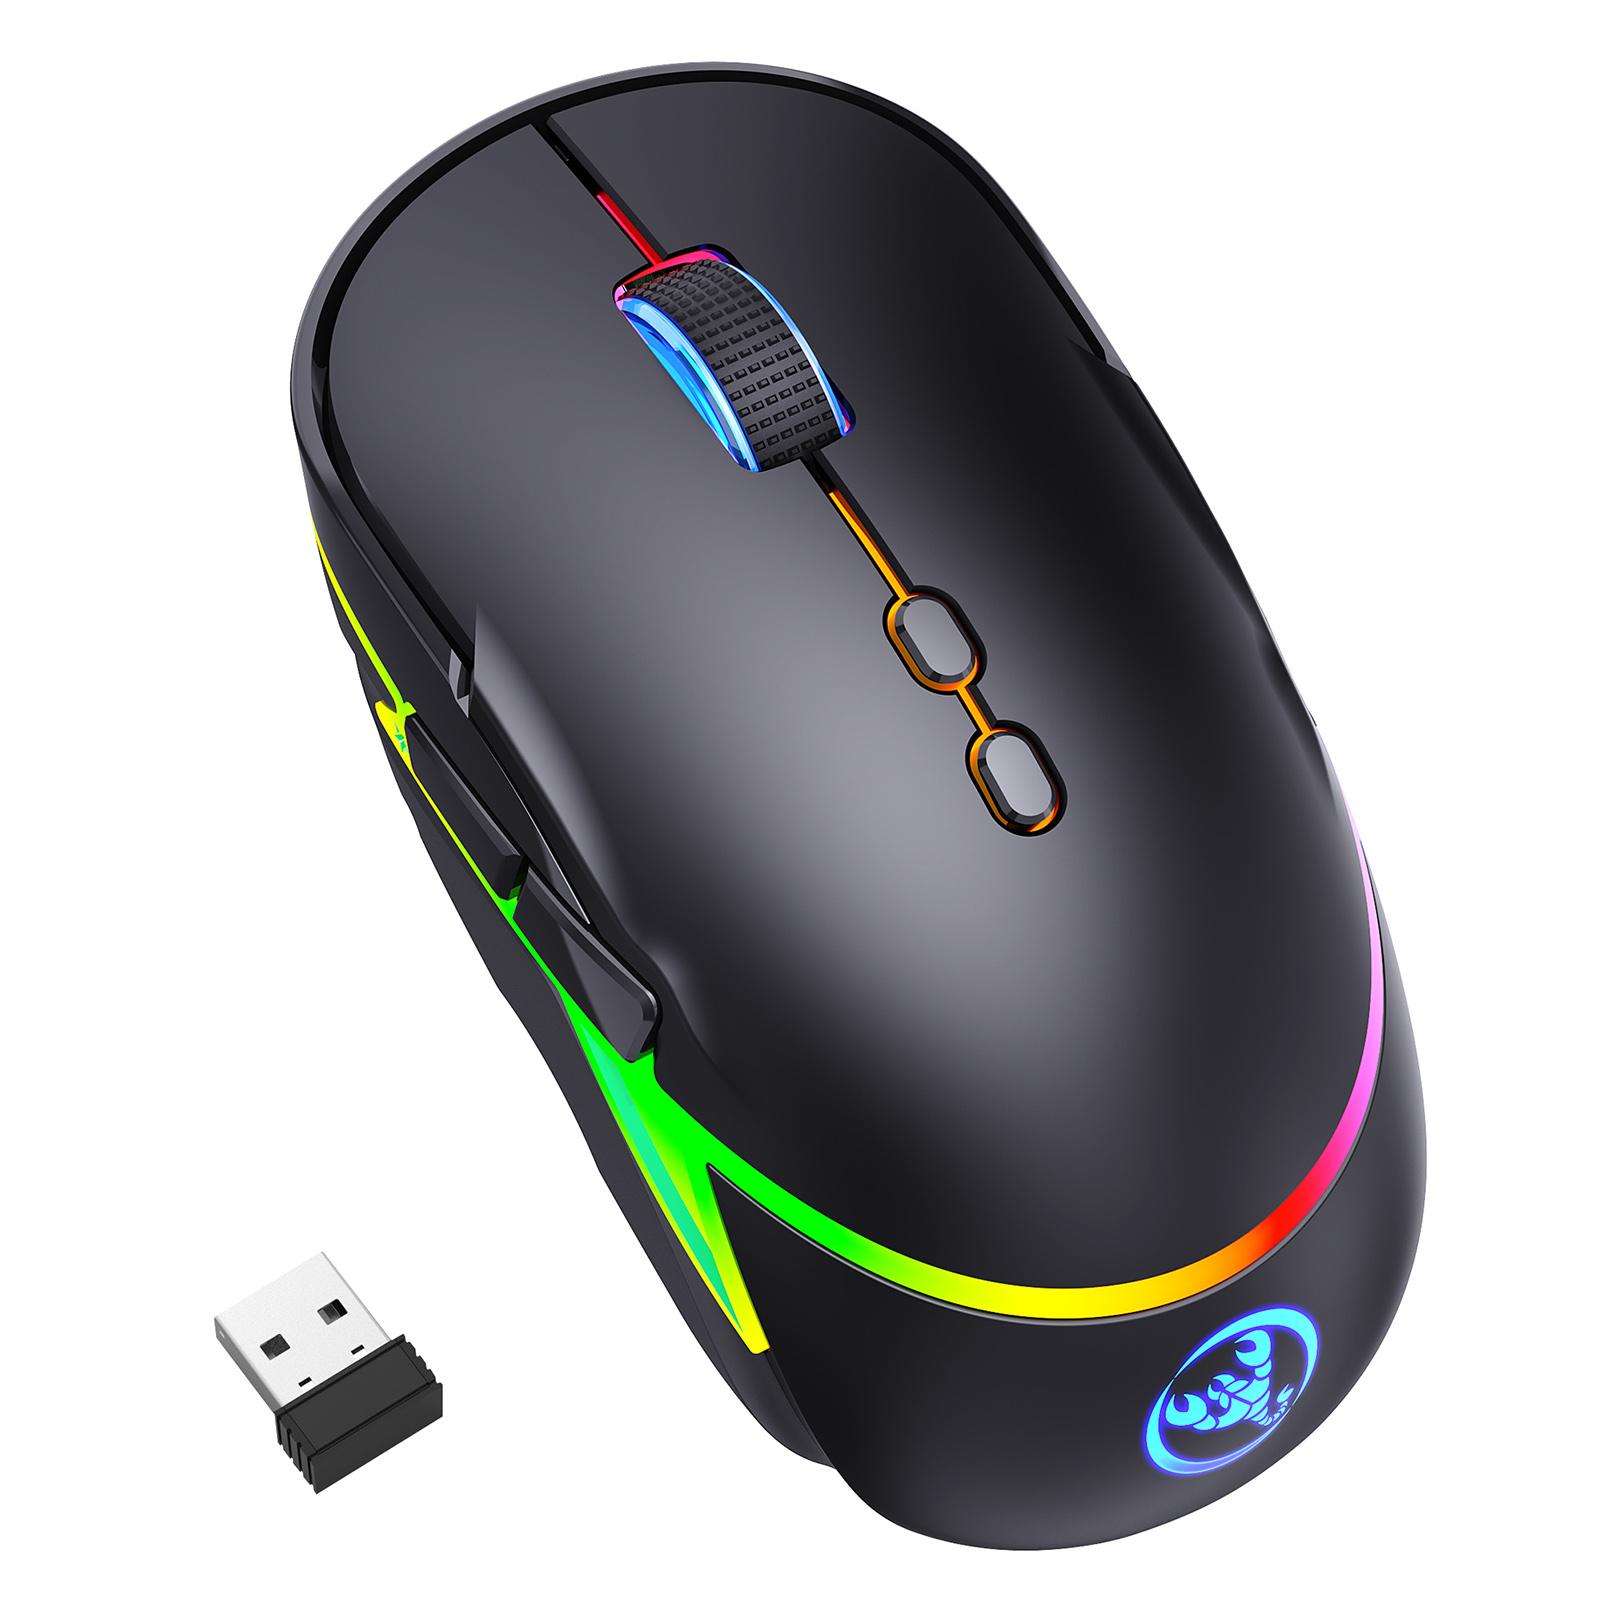 HXSJ T200 2.4G Wireless Gaming Mouse Ergonomic Mouse 3 Adjustable DPI 12 Kinds of RGB Light Effects